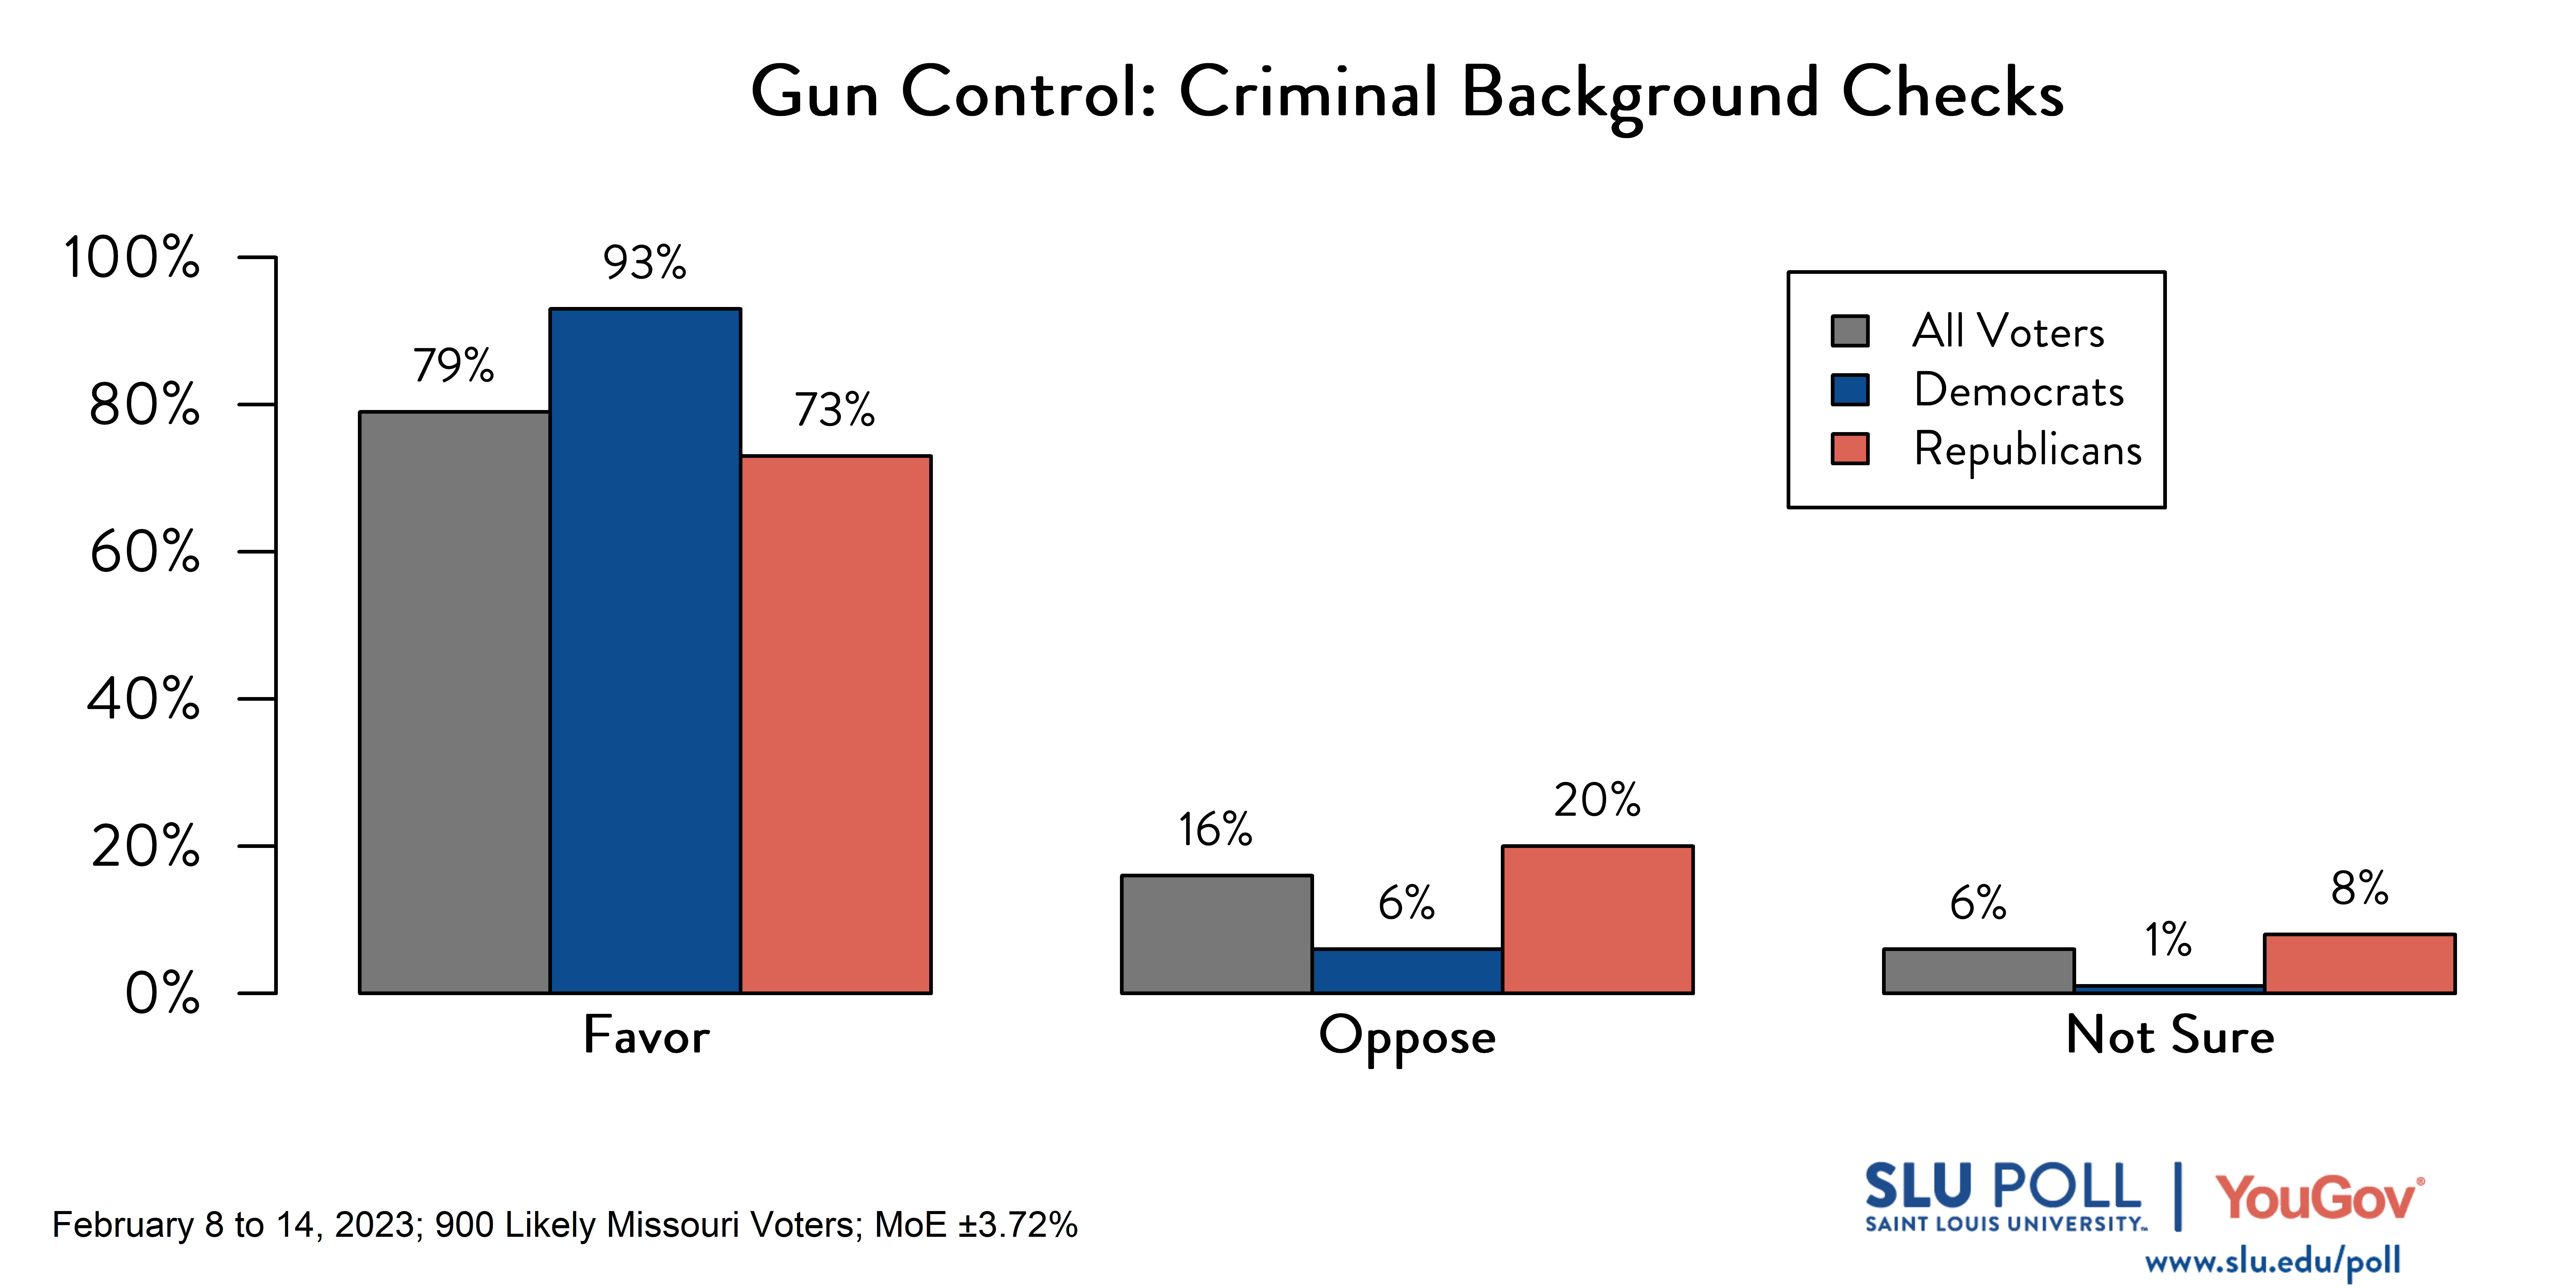 Likely voters' responses to 'Do you favor or oppose the following gun policies becoming law in Missouri: Requiring criminal background checks for all those buying guns, including at gun shows and private sales?': 79% Favor, 16% Oppose, and 6% Not sure. Democratic voters' responses: ' 93% Favor, 6% Oppose, and 1% Not sure. Republican voters' responses: 73% Favor, 20% Oppose, and 8% Not sure.